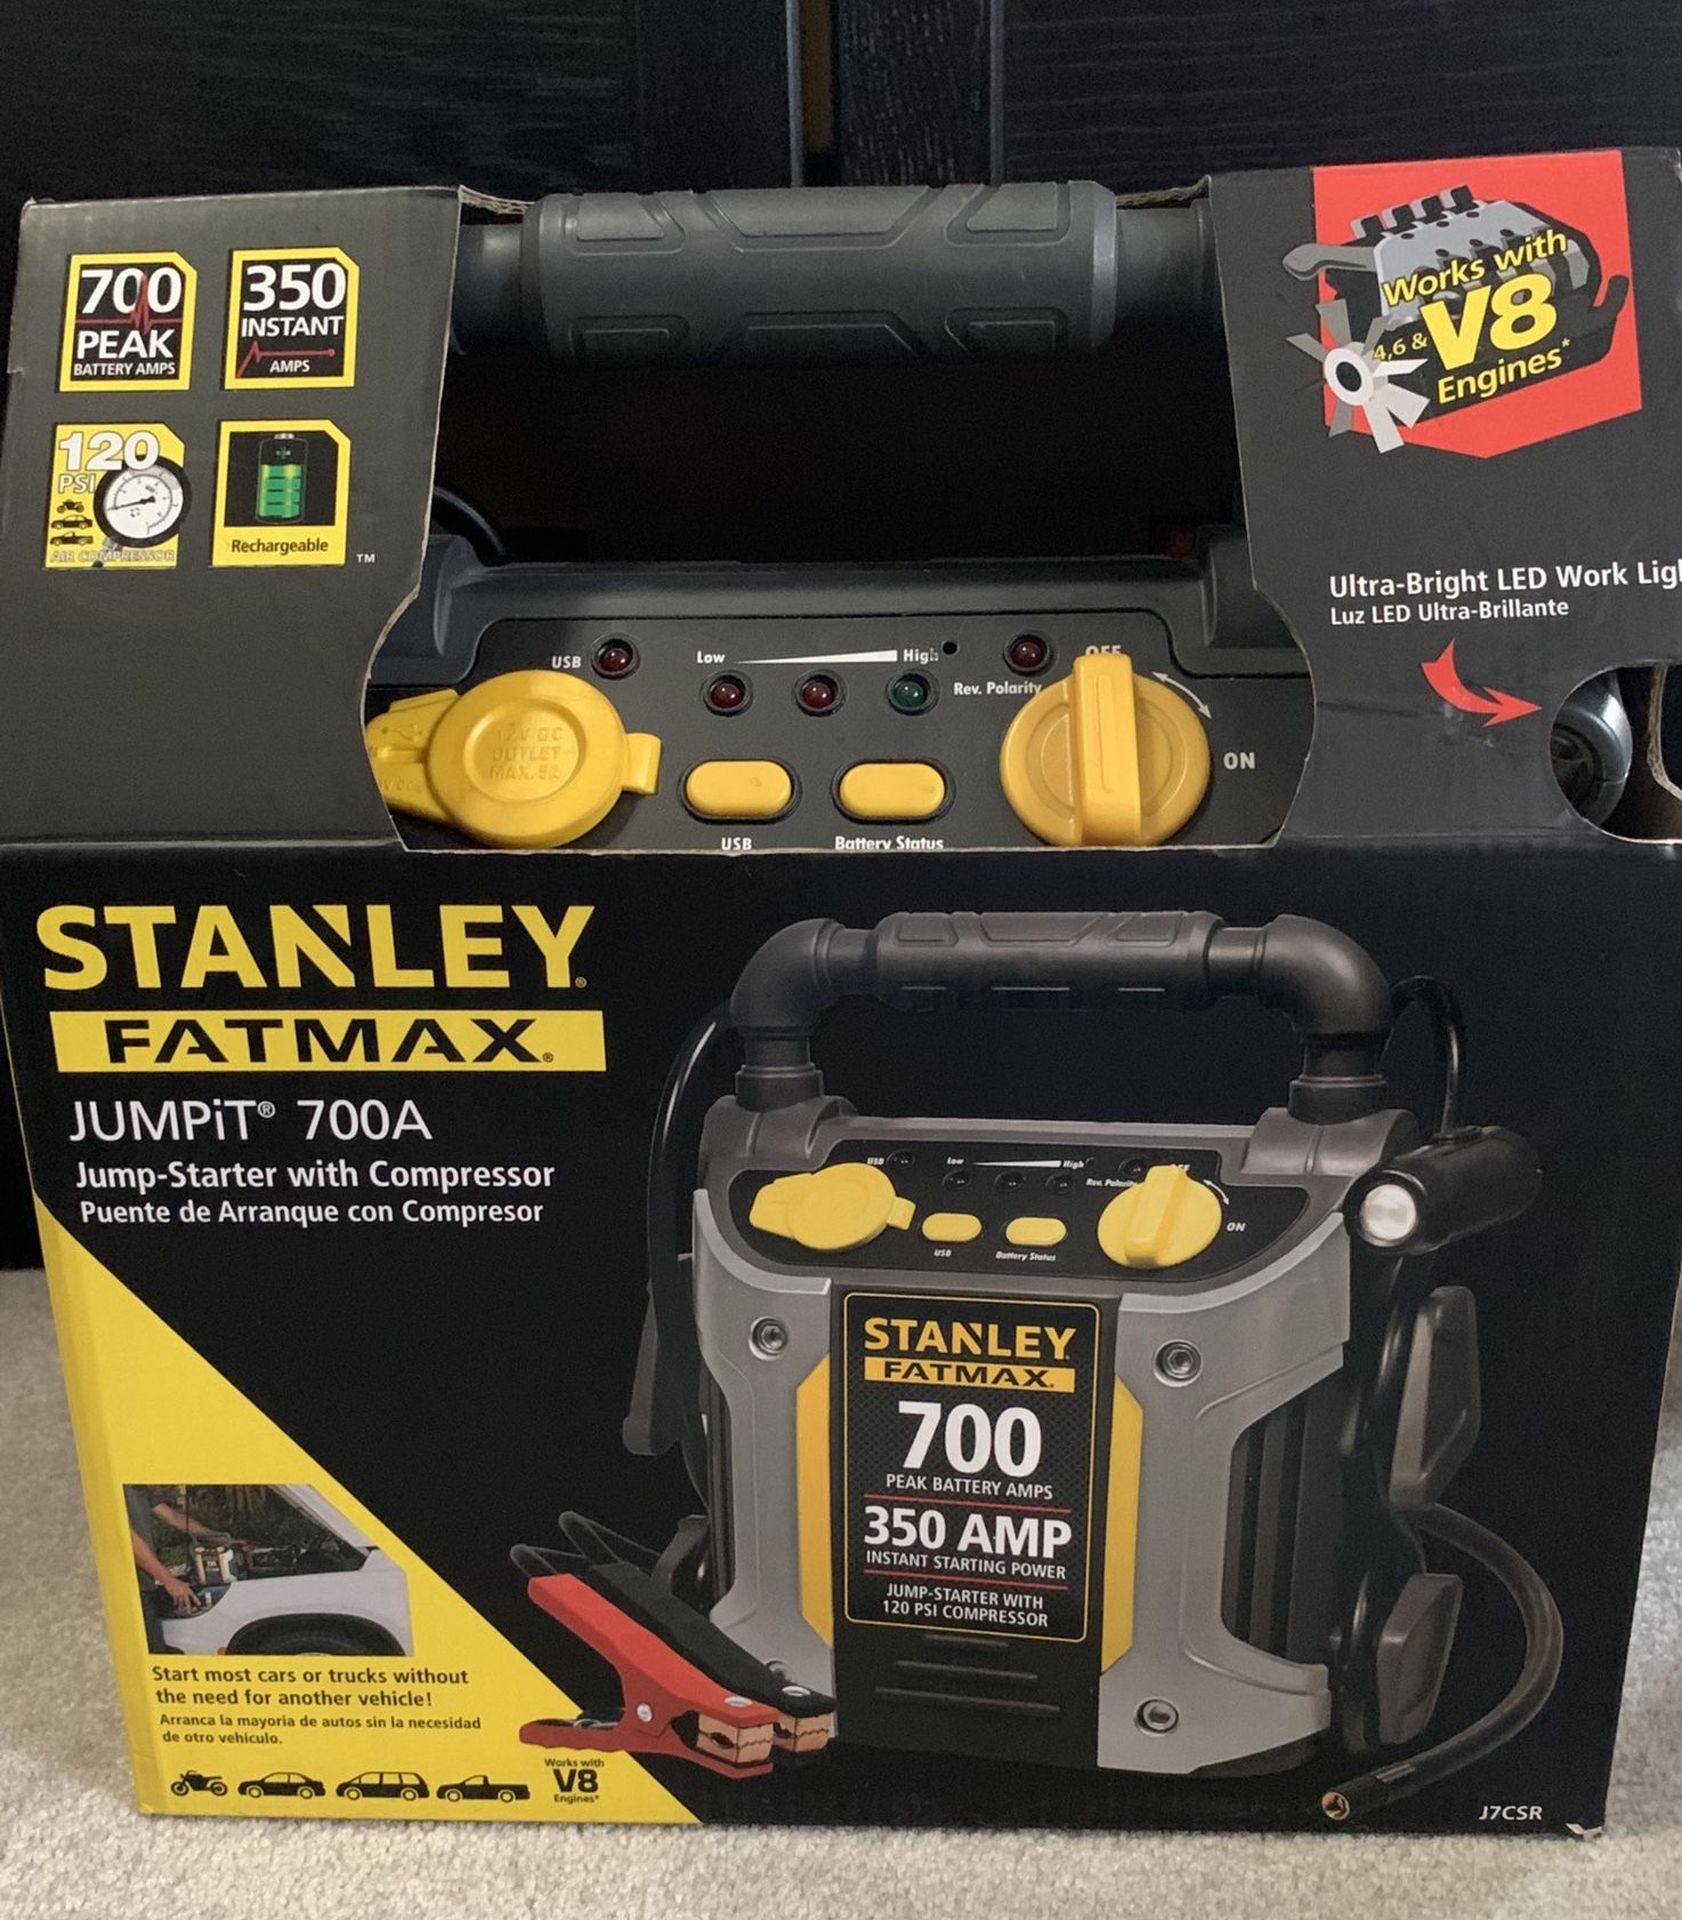 Stanley Fatmax Jumpit 700A Jump Starter With Air Compressor - In Box (Repair)